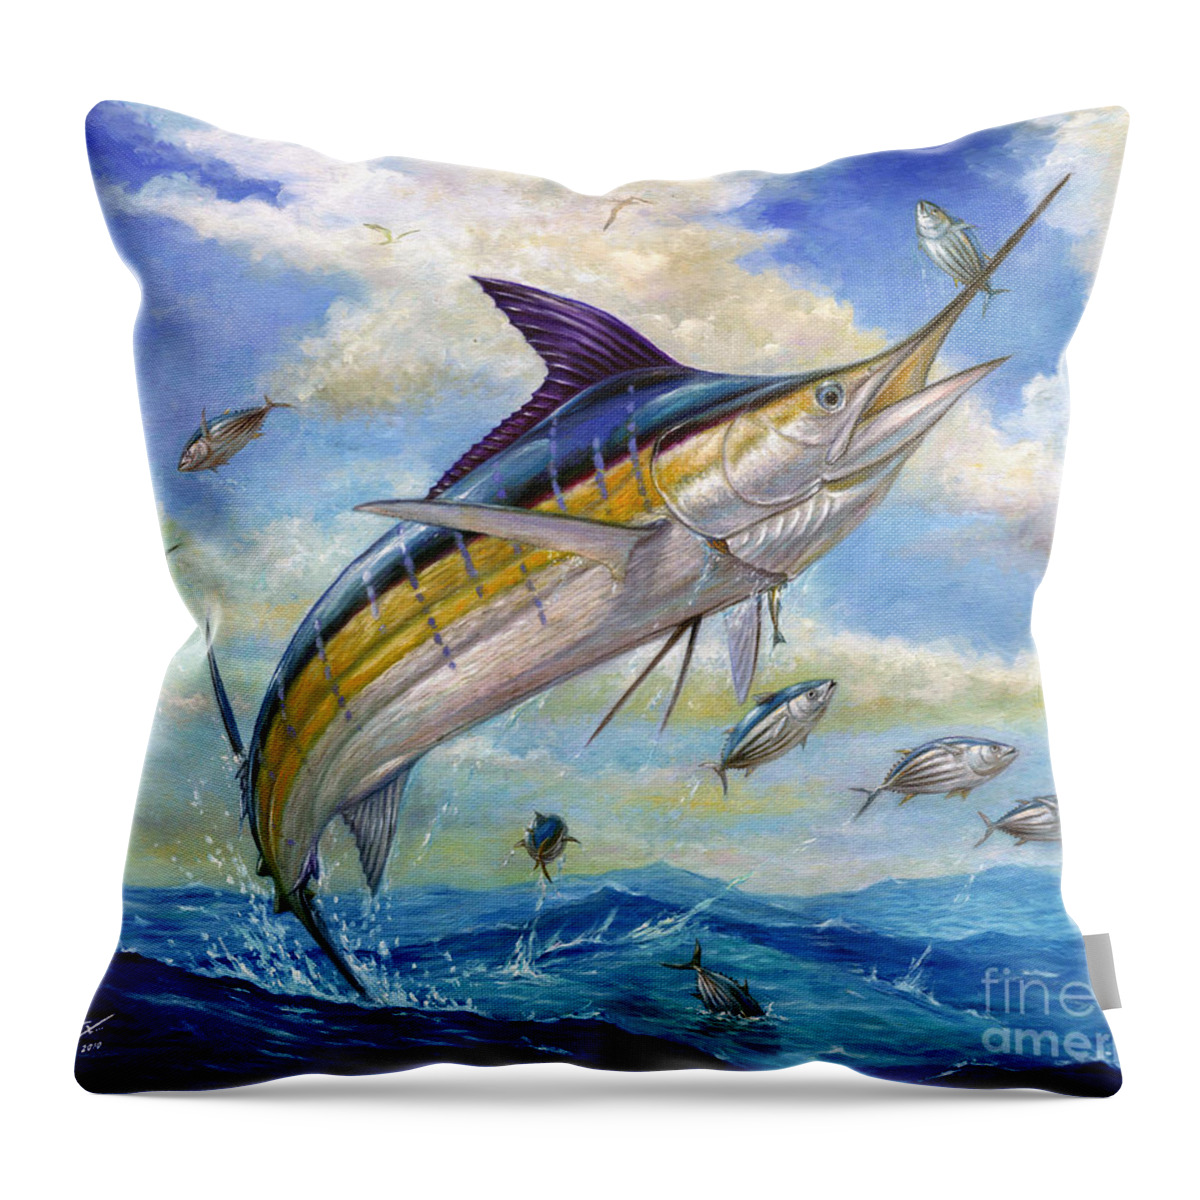 Blue Marlin Throw Pillow featuring the painting The Blue Marlin Leaping To Eat by Terry Fox